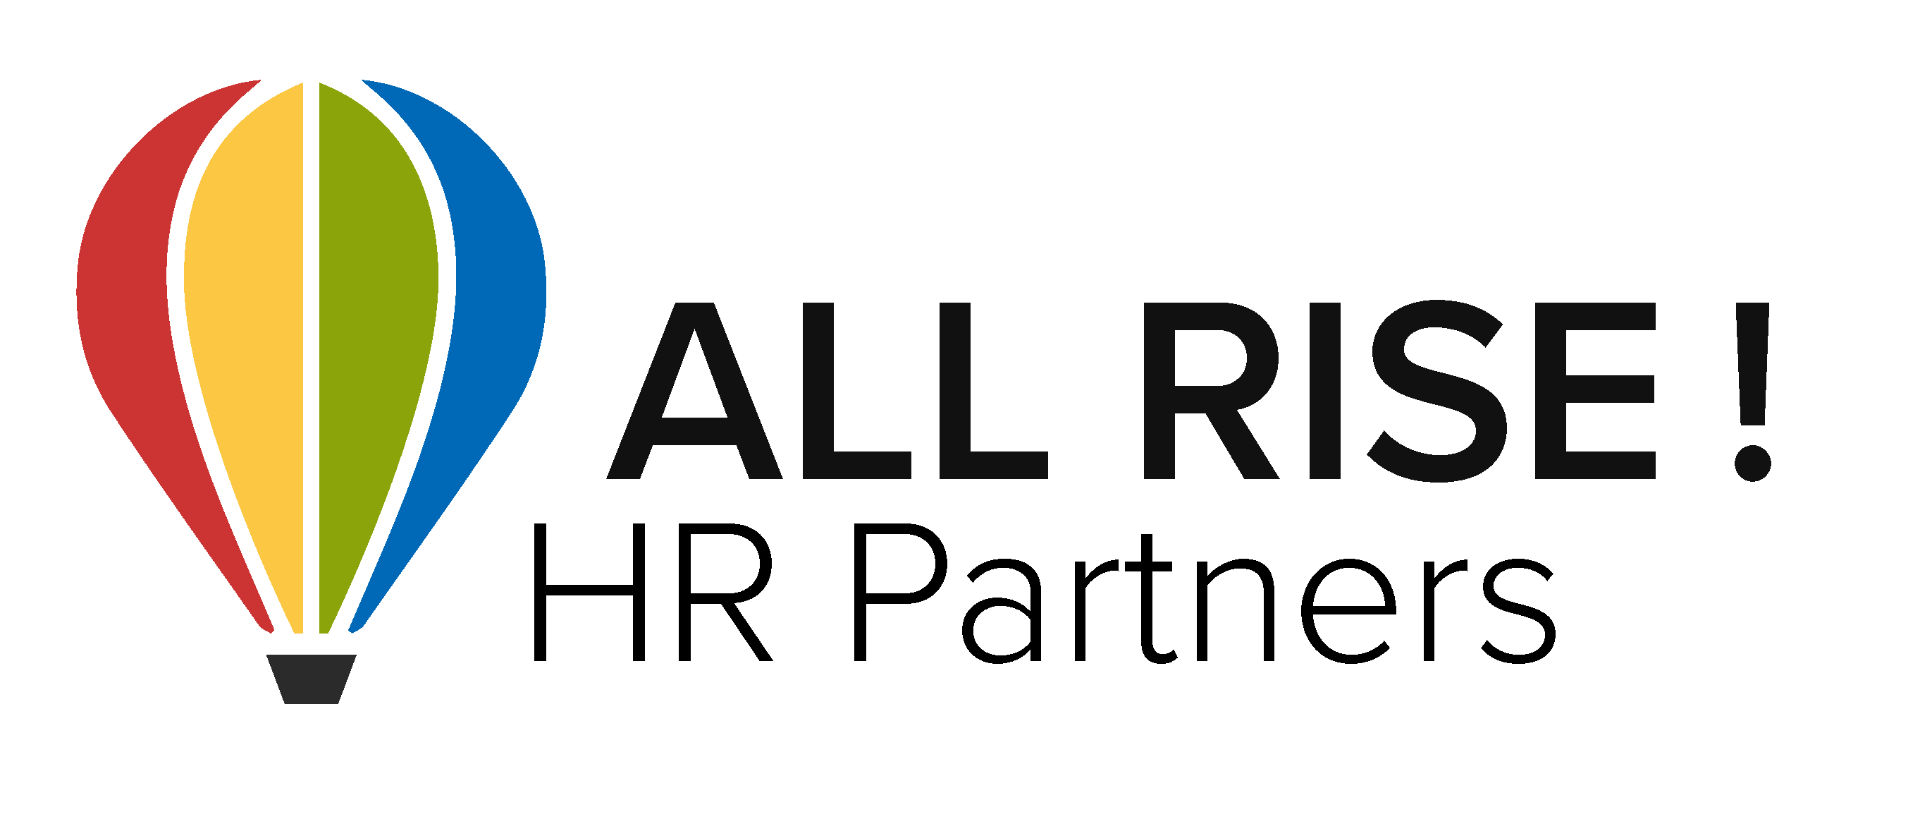 All Rise! - HR Partners